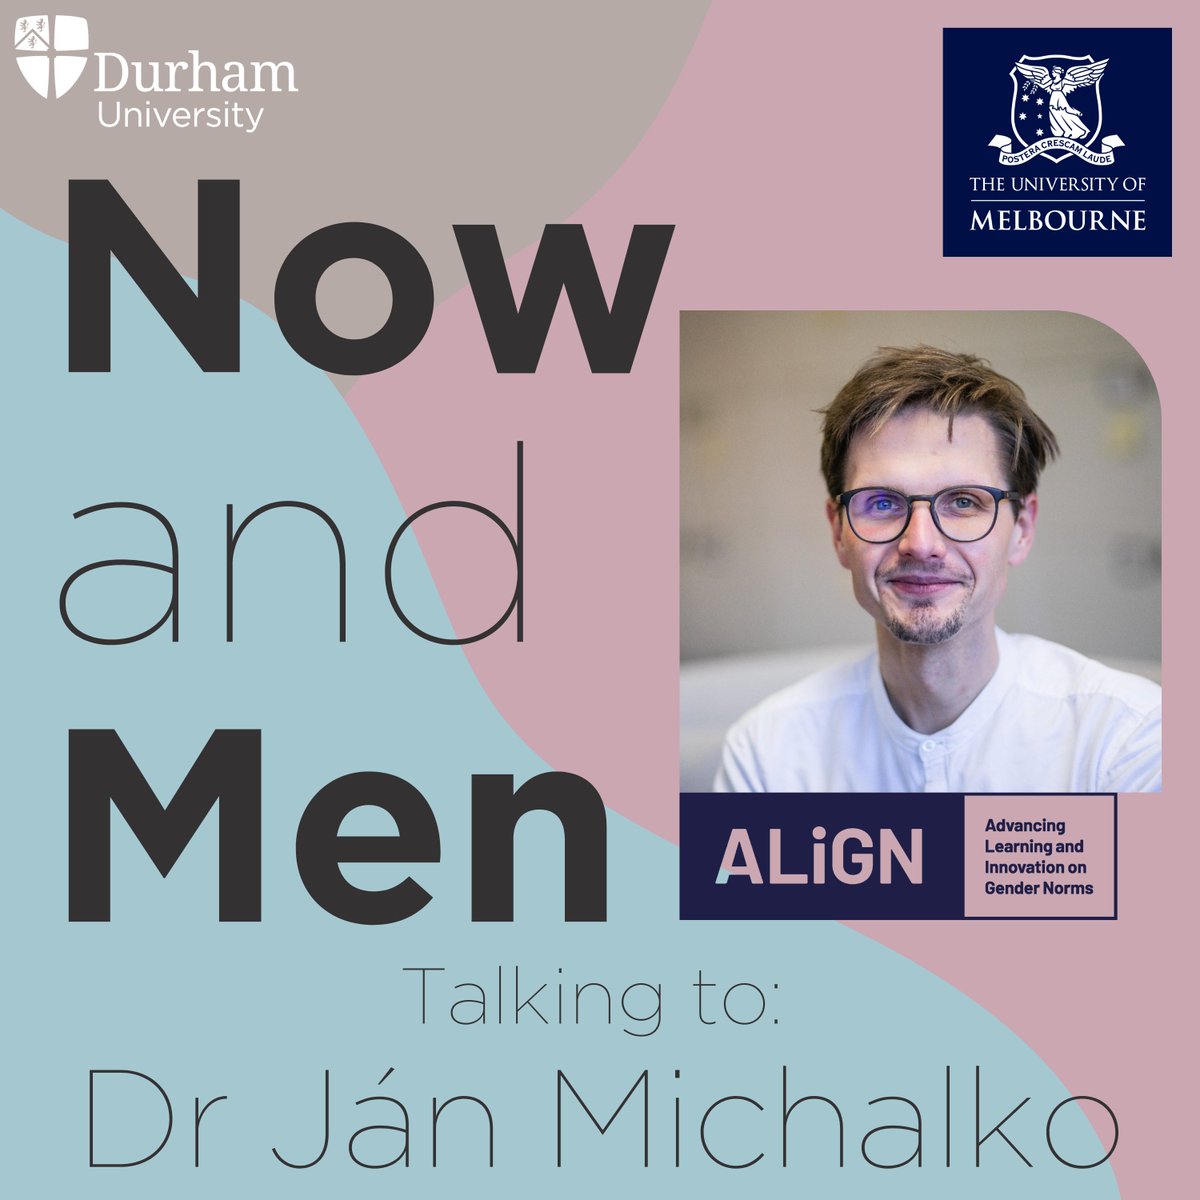 We have a new episode of #NowandMen out today, with @MichalkoJan from @ODI_Global! Ján discusses fascinating new @ALIGN_Gender research on how men in politics engage with feminism, & their role in building gender equality & changing harmful masculine norms now-and-men.captivate.fm/episode/men-in…